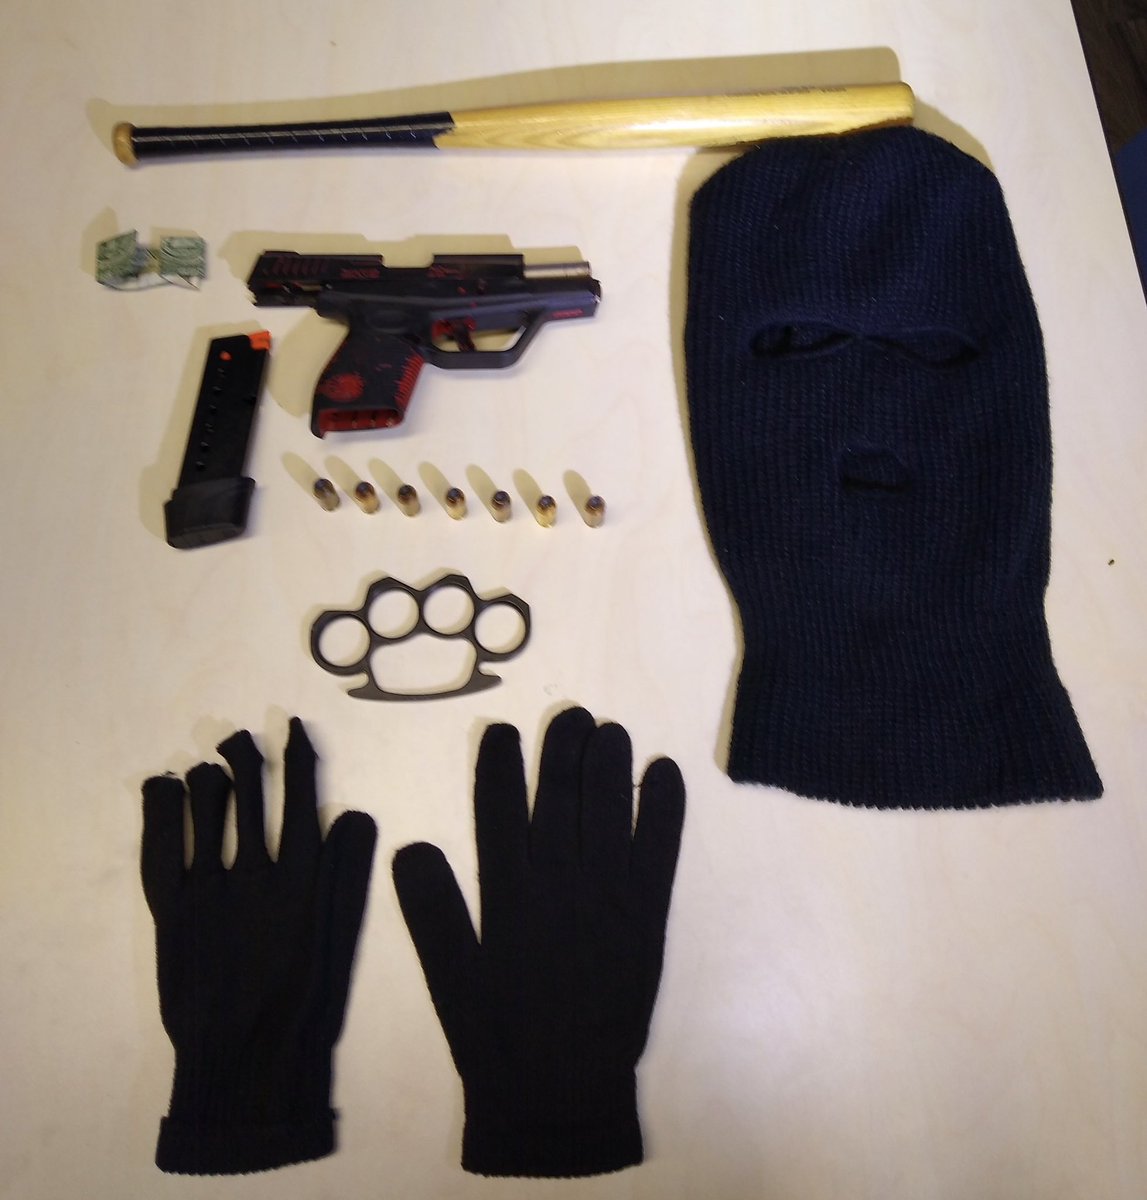 Excellent #ProactivePolicing!

Officers conducted a stop for CVC violations. Upon contacting the driver, an officer observed a “Billy Club” inside the vehicle. Further investigation revealed meth, brass knuckles & a loaded handgun. The suspect was arrested without incident.